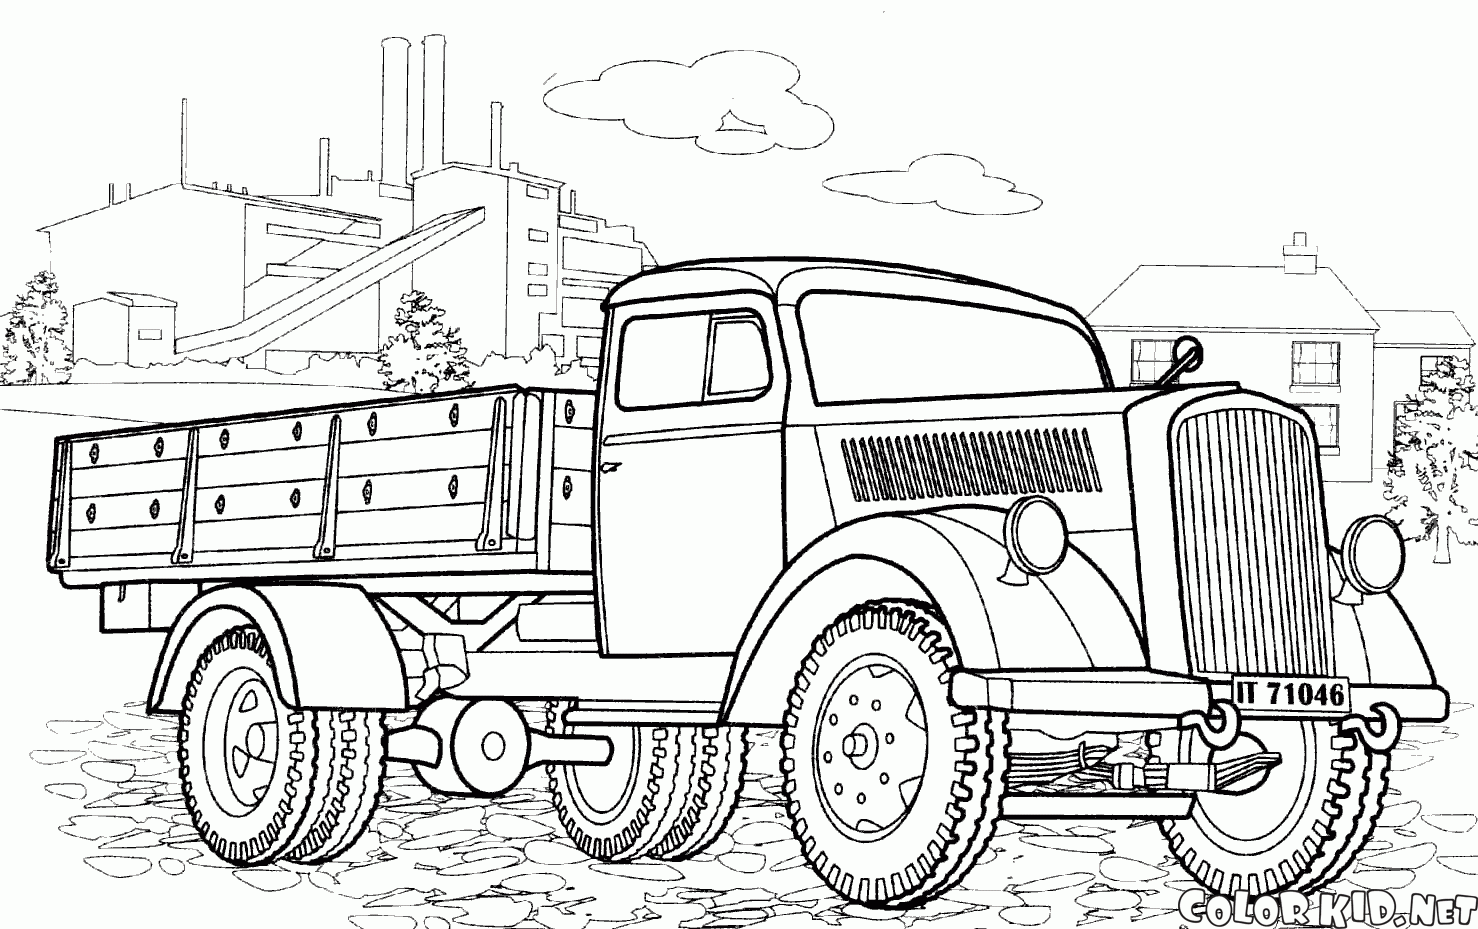 Pickup Truck Coloring Pages